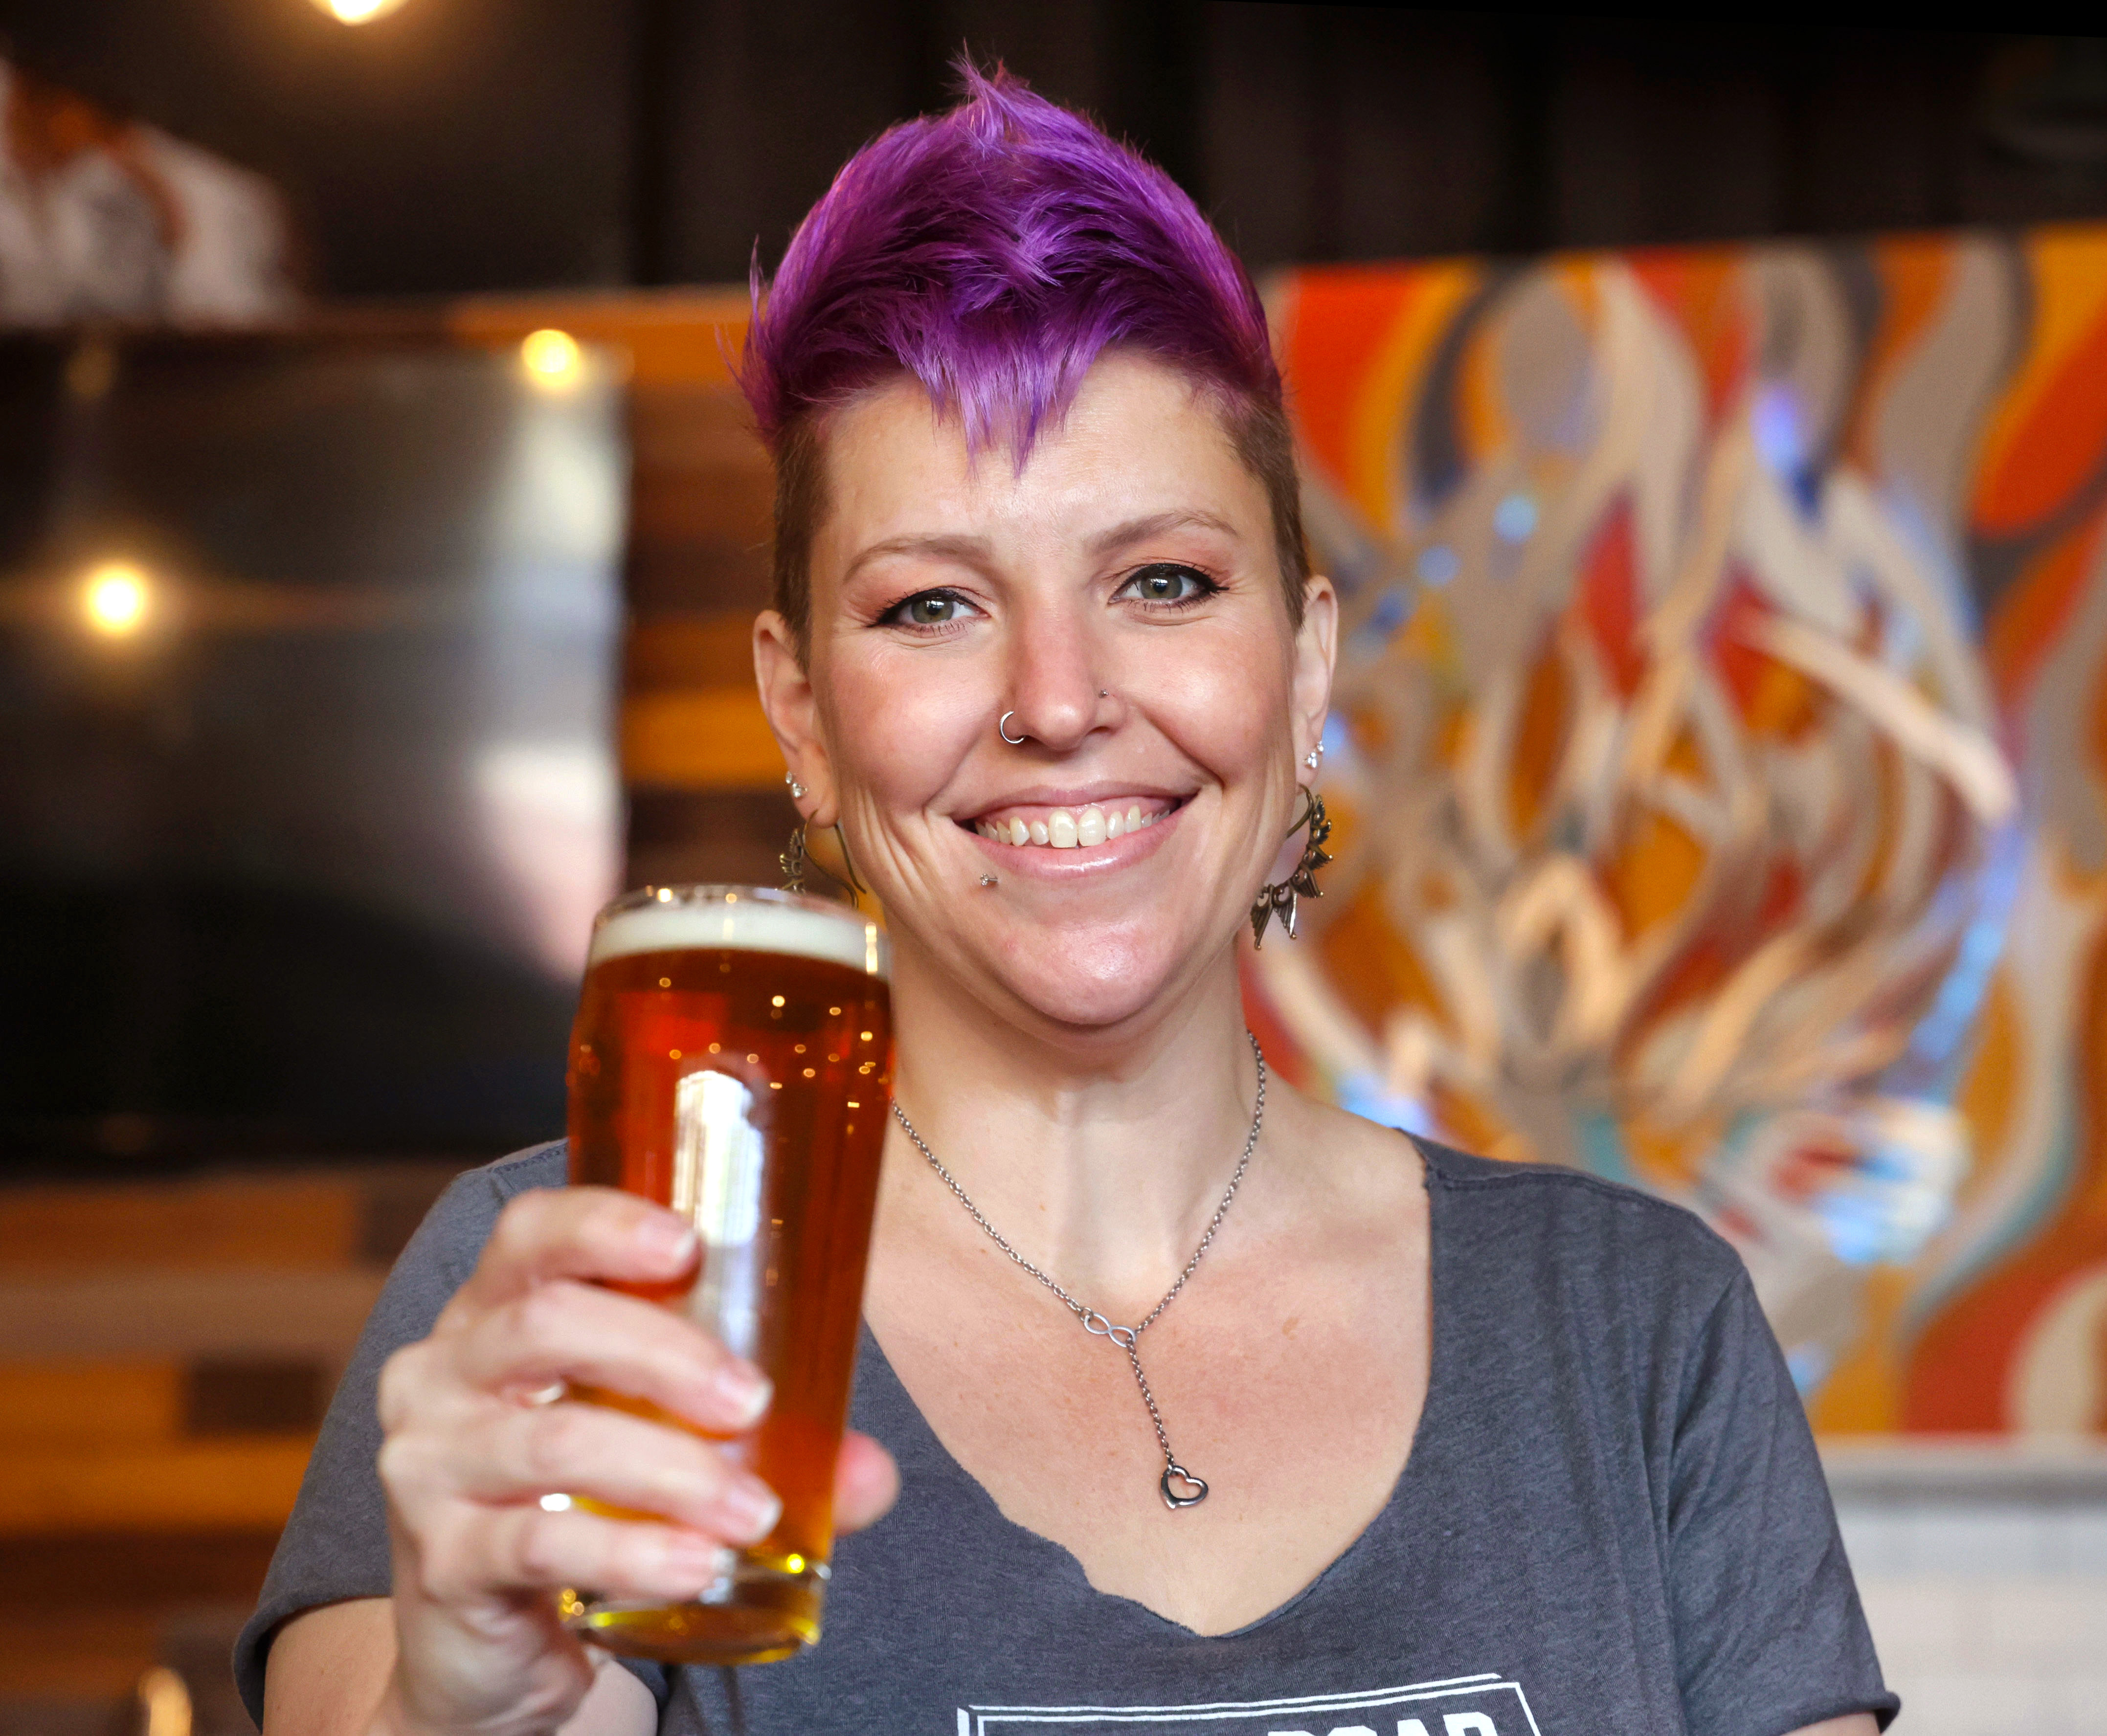 Amanda Smythe from Tollroad Brewing raises a glass at Deviant Wolfe in downtown Sanford, Thursday, May 21, 2024. (Joe Burbank/Orlando Sentinel)